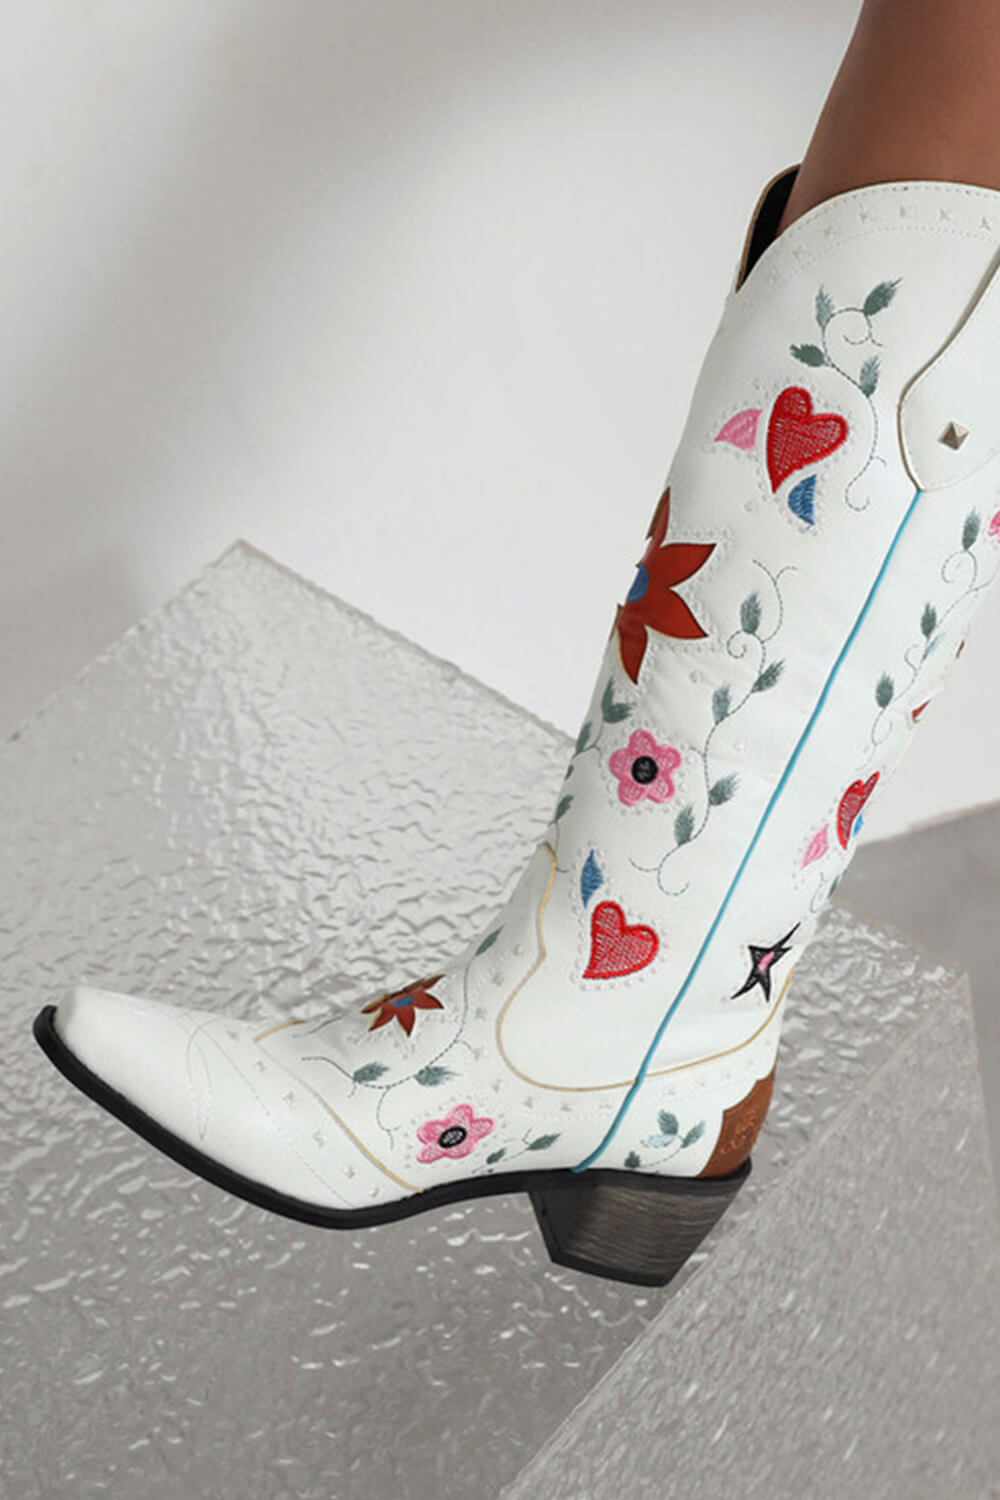 Vintage Floral And Heart Printed Western Cowgirl Block Heeled Knee High Boots - White